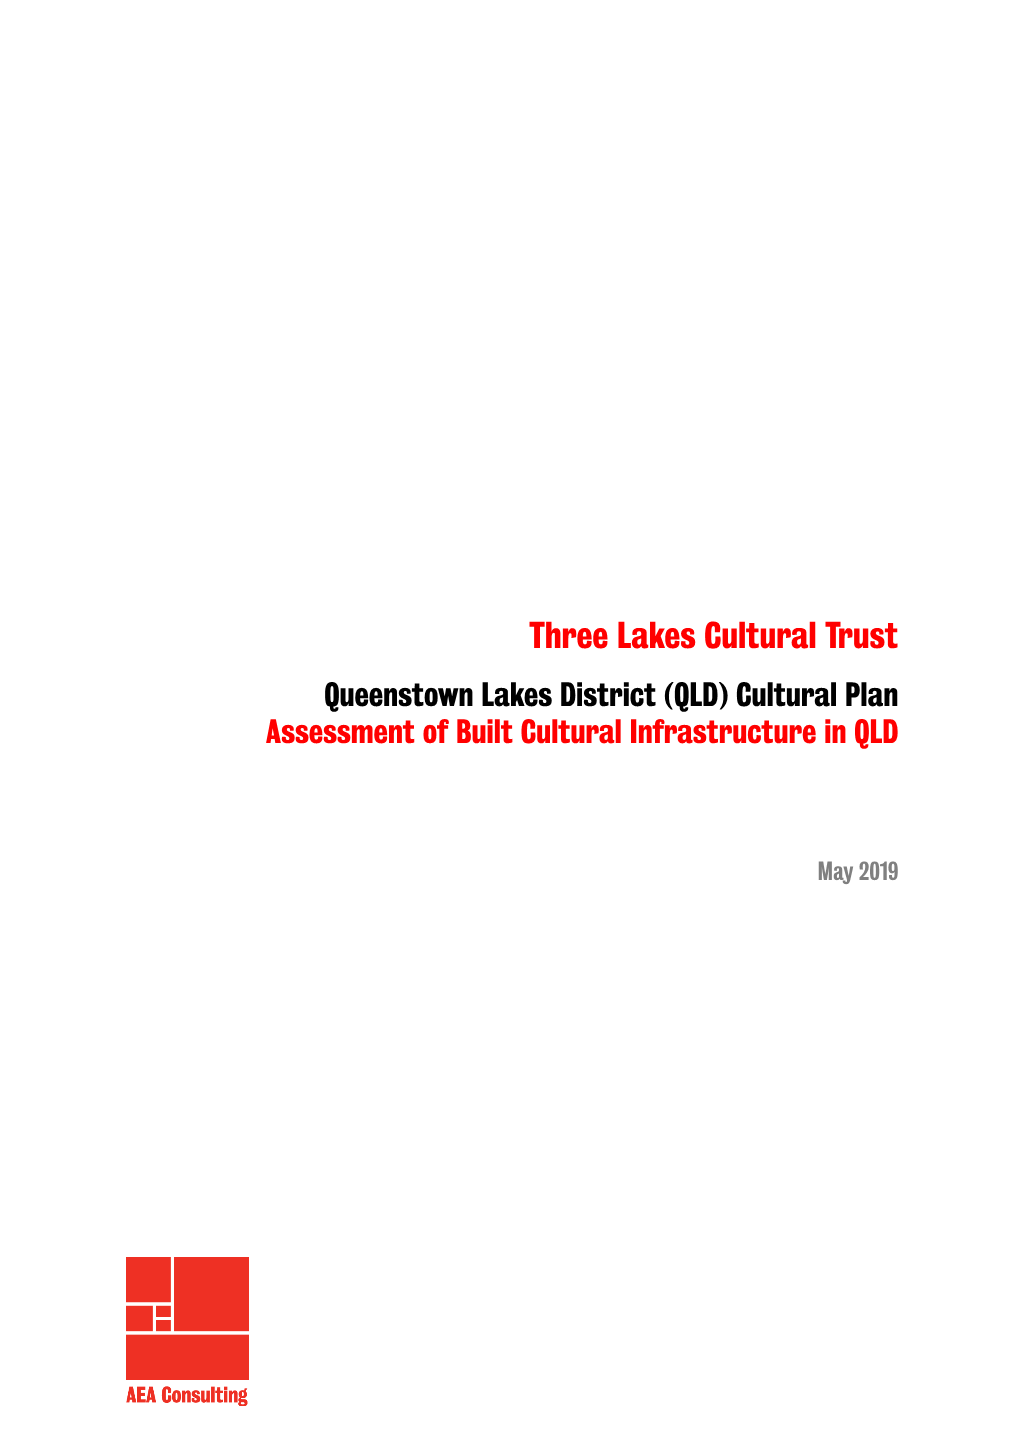 Queenstown Lakes District (QLD) Cultural Plan Assessment of Built Cultural Infrastructure in QLD